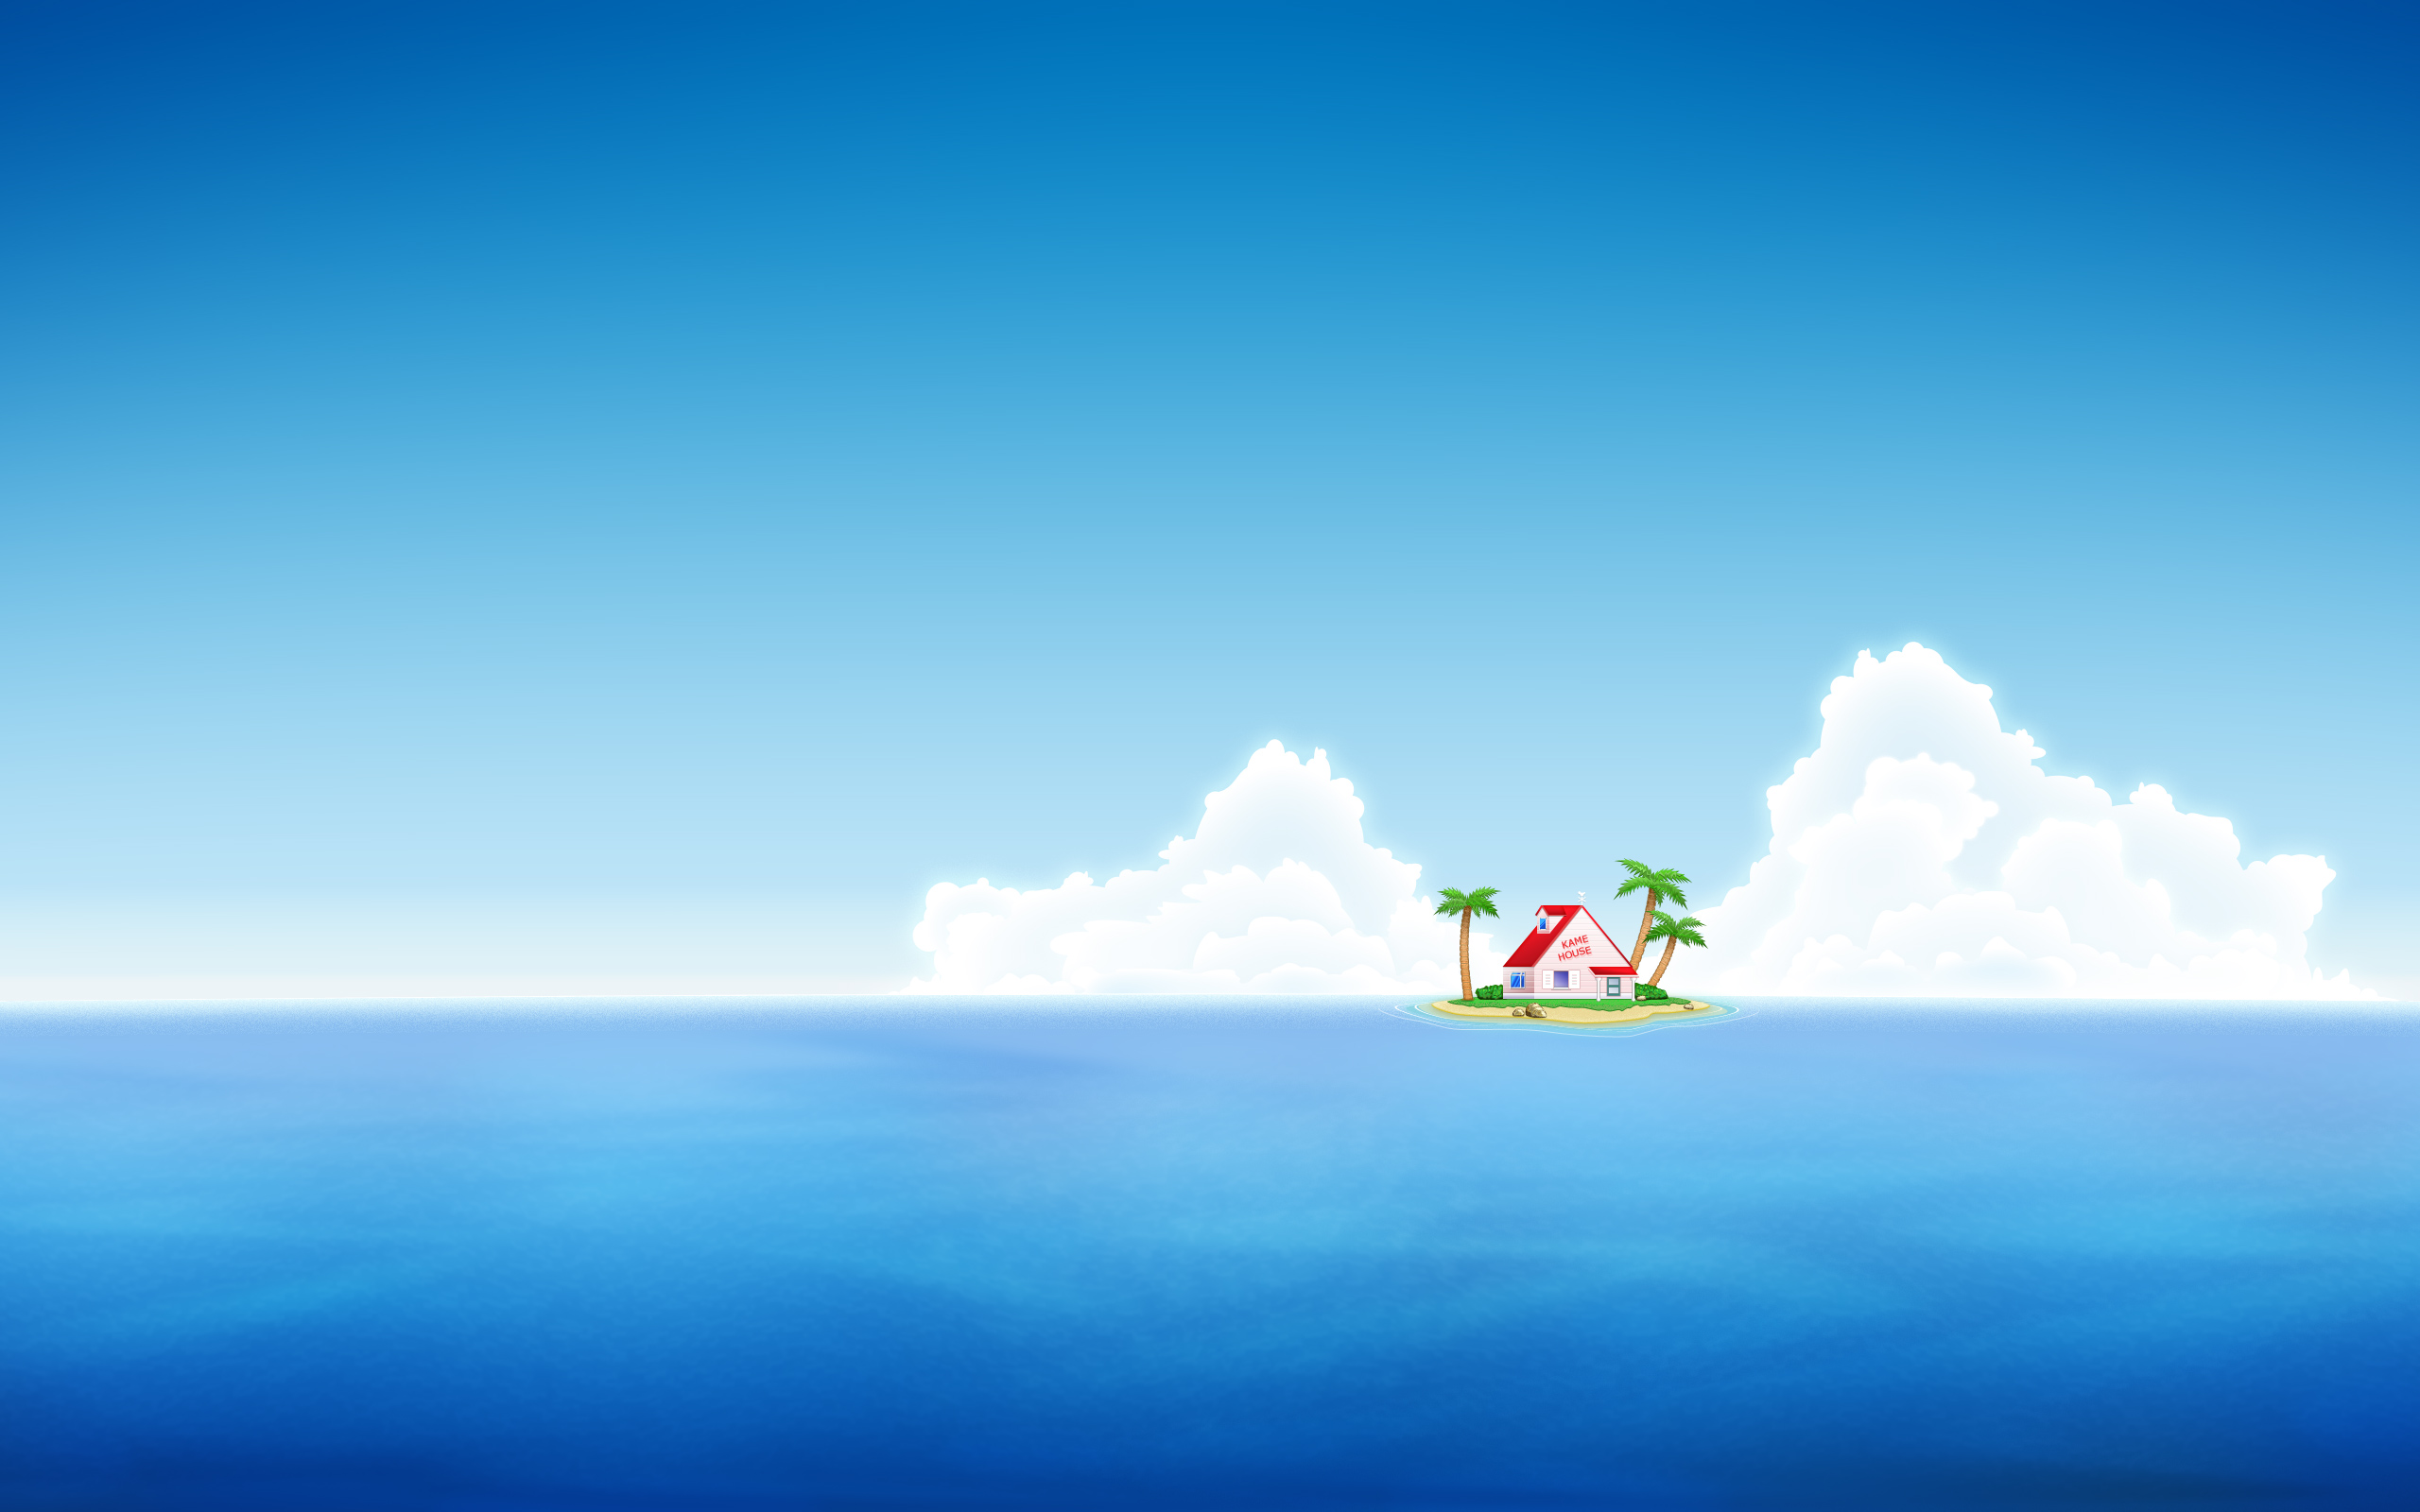 Kame House HD Wallpapers and Backgrounds. 